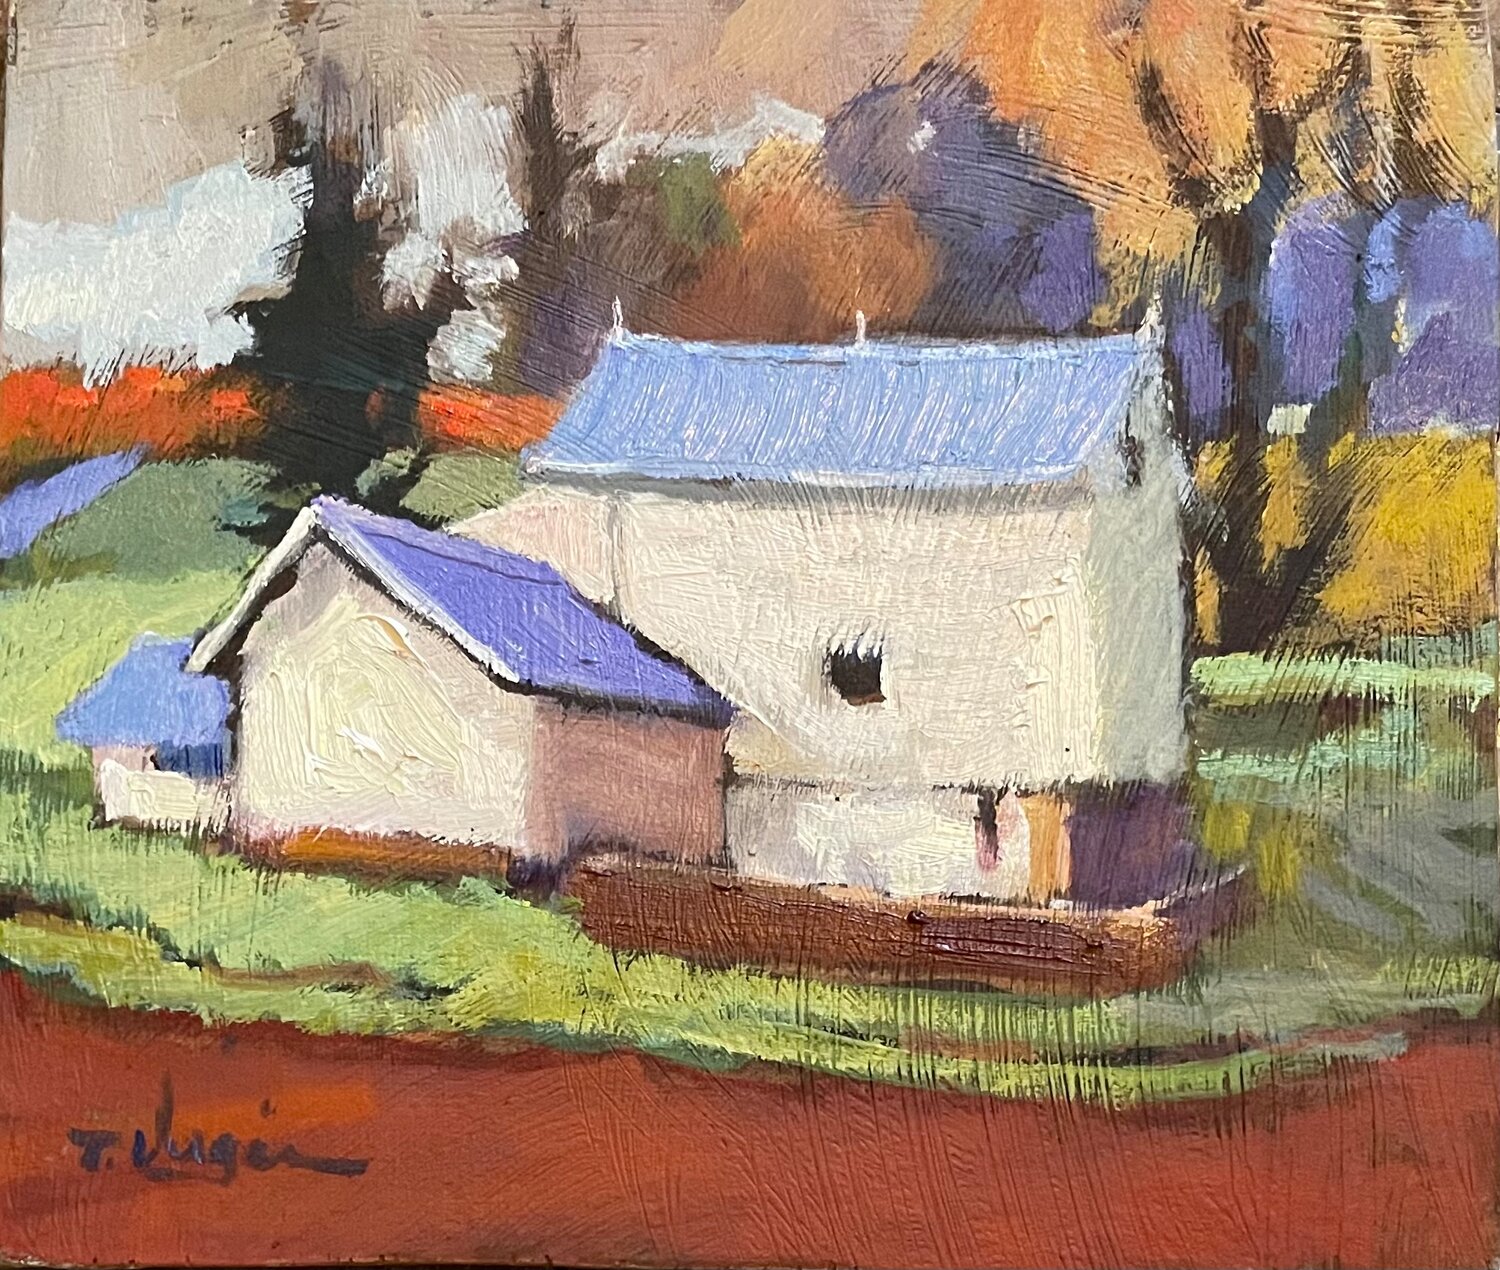 “Seargentsville Barns” is by Trisha Vergis.